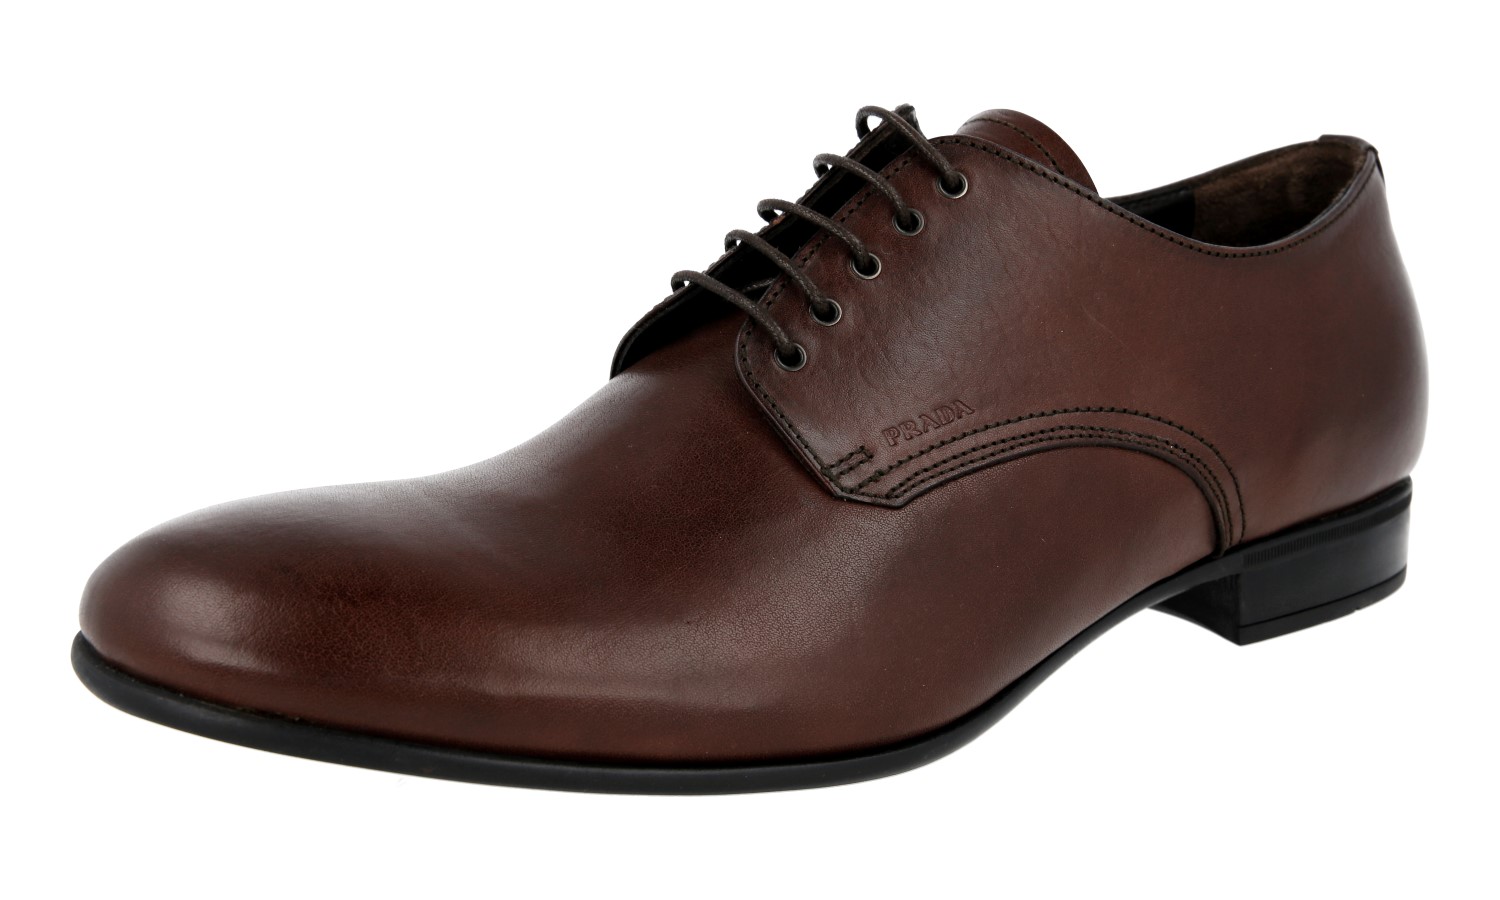 AUTH LUXURY PRADA DERBY BUSINESS SHOES 2E2748 BROWN LEATHER NEW | eBay